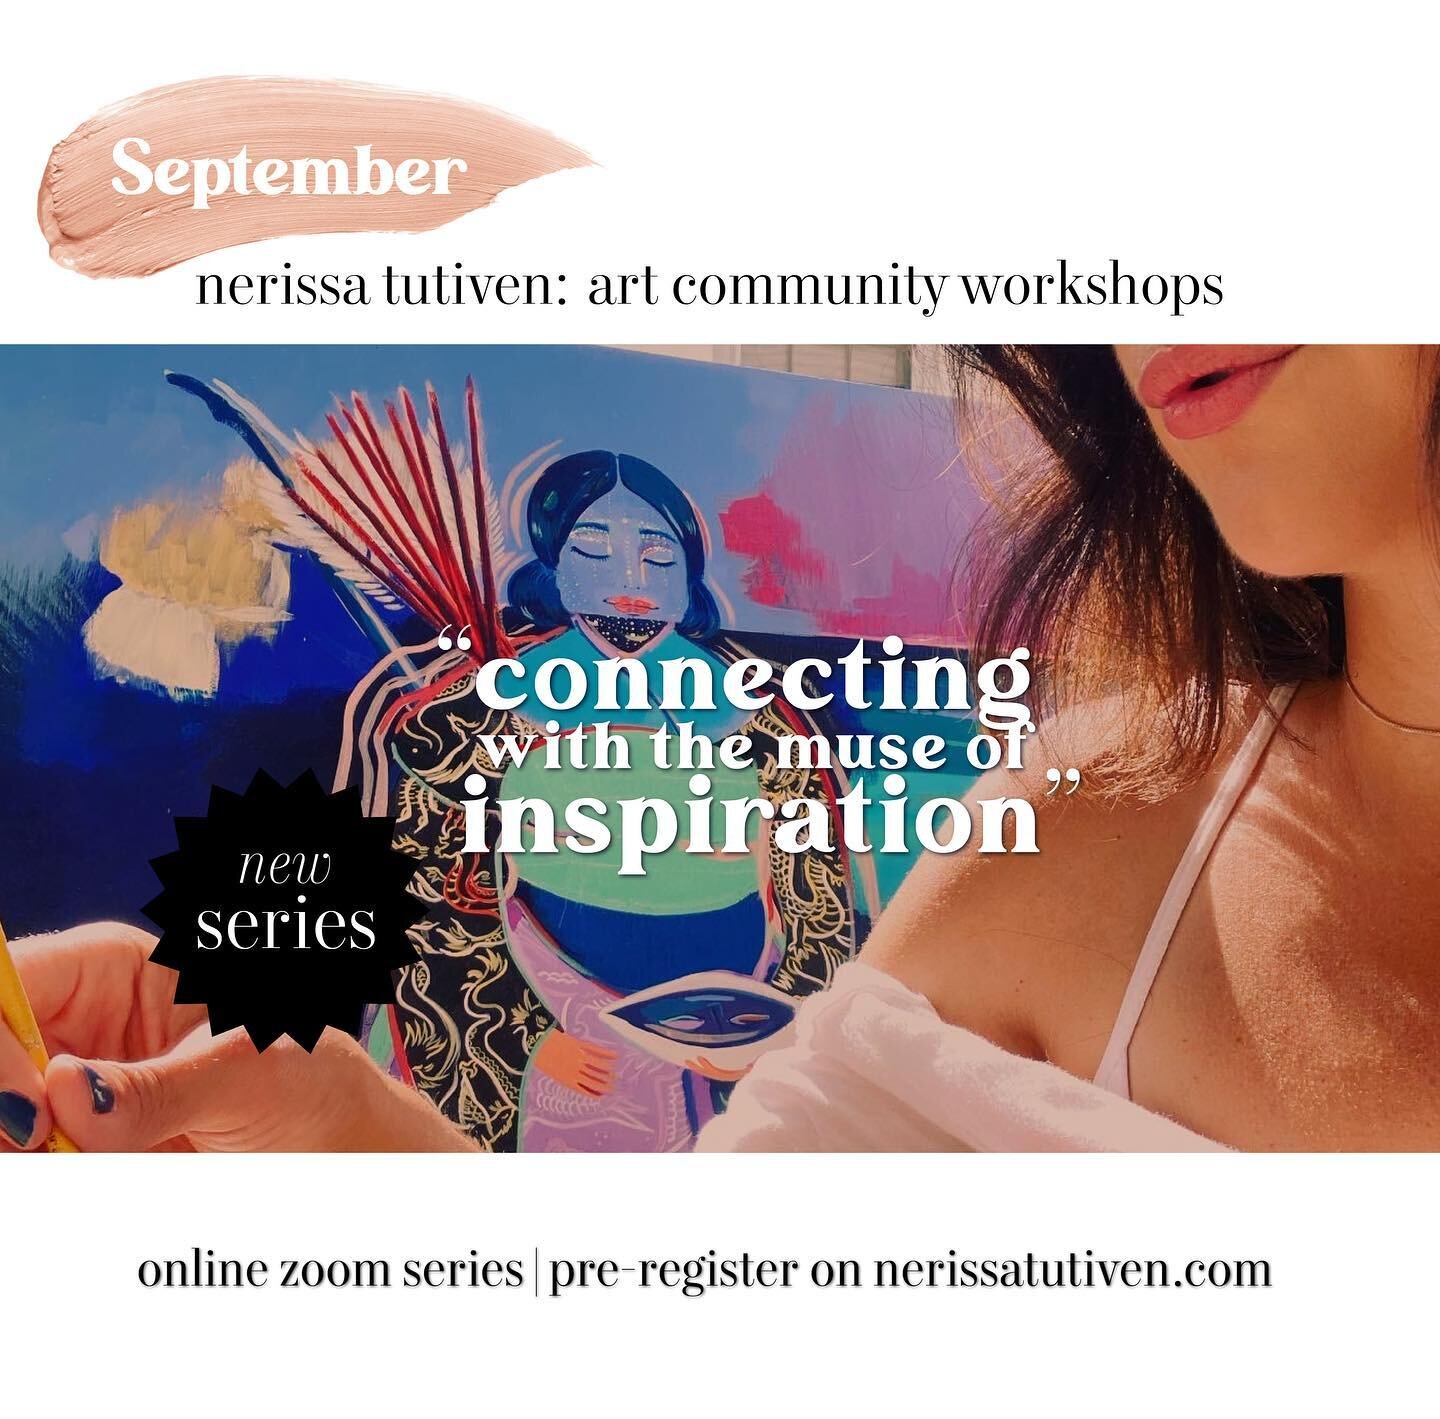 Just a little leak, of more information to come.

There&rsquo;s a Pre-Registration link, in my LinkTree.

Go, check it out.

&ldquo;Connecting with the Muse of Inspiration&rdquo;, will be a series over the course of three sessions in #September, to h